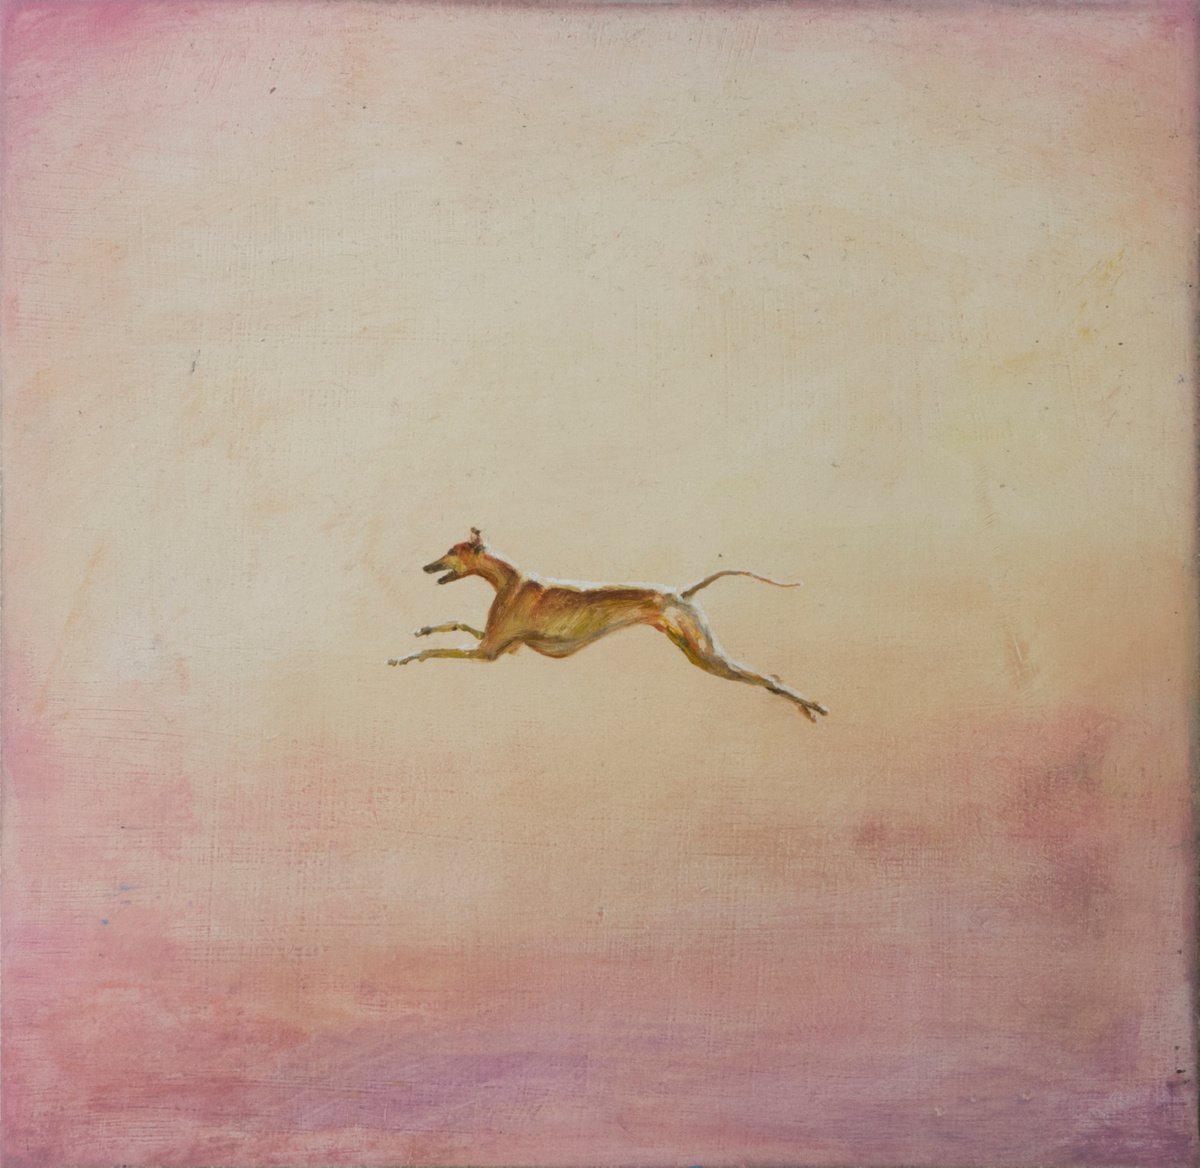 Leap into the sky by Lisa Braun